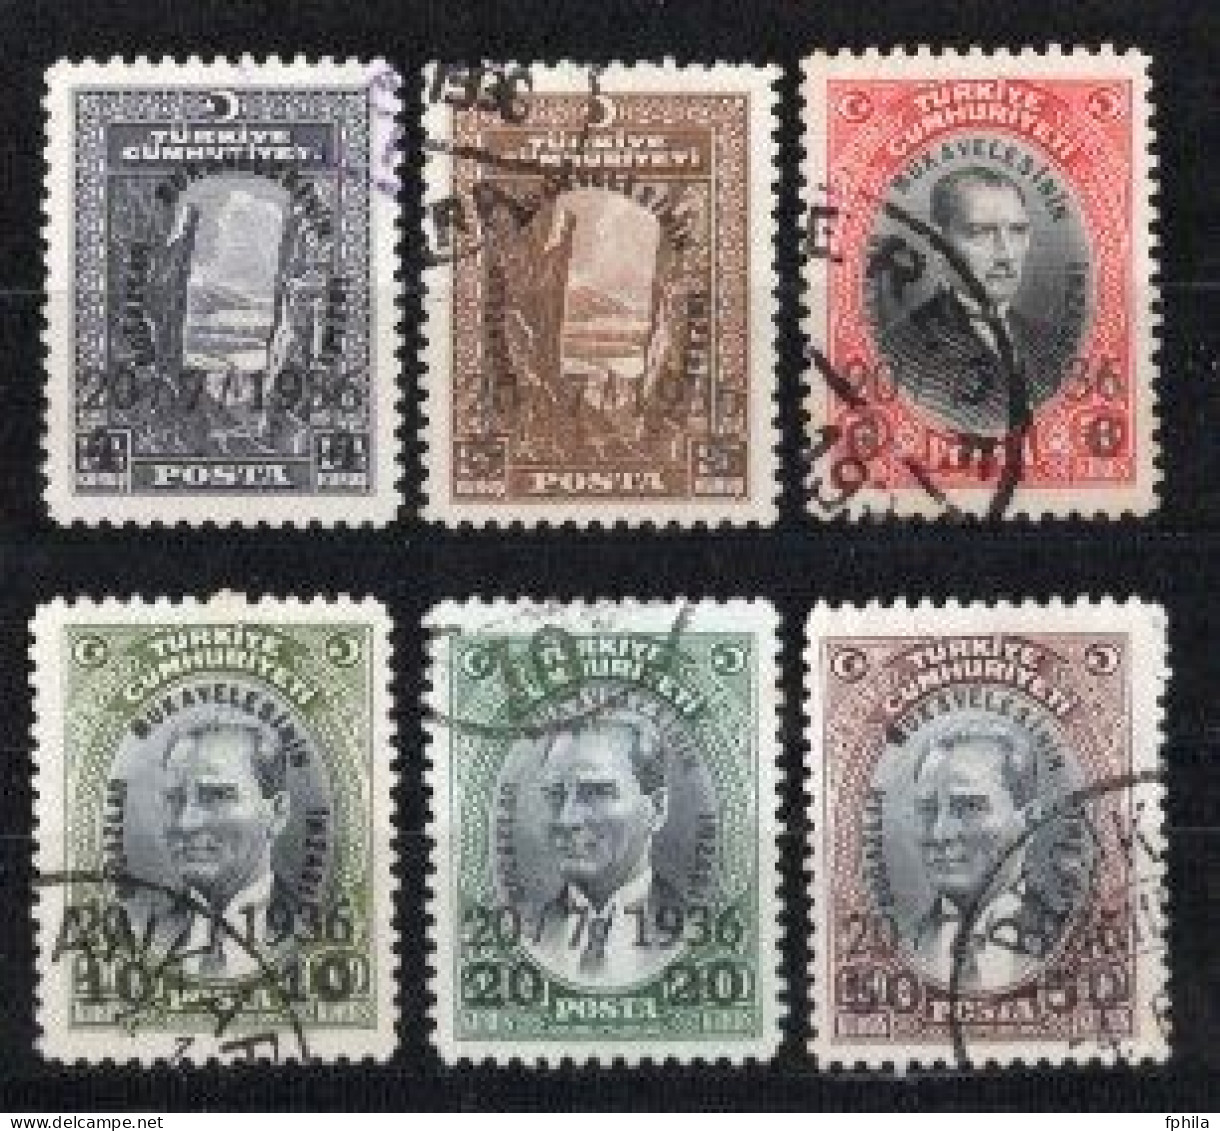 1936 TURKEY SURCHARGED COMMEMORATIVE STAMPS FOR THE SIGNATURE OF THE STRAITS SETTLEMENT USED - Gebraucht